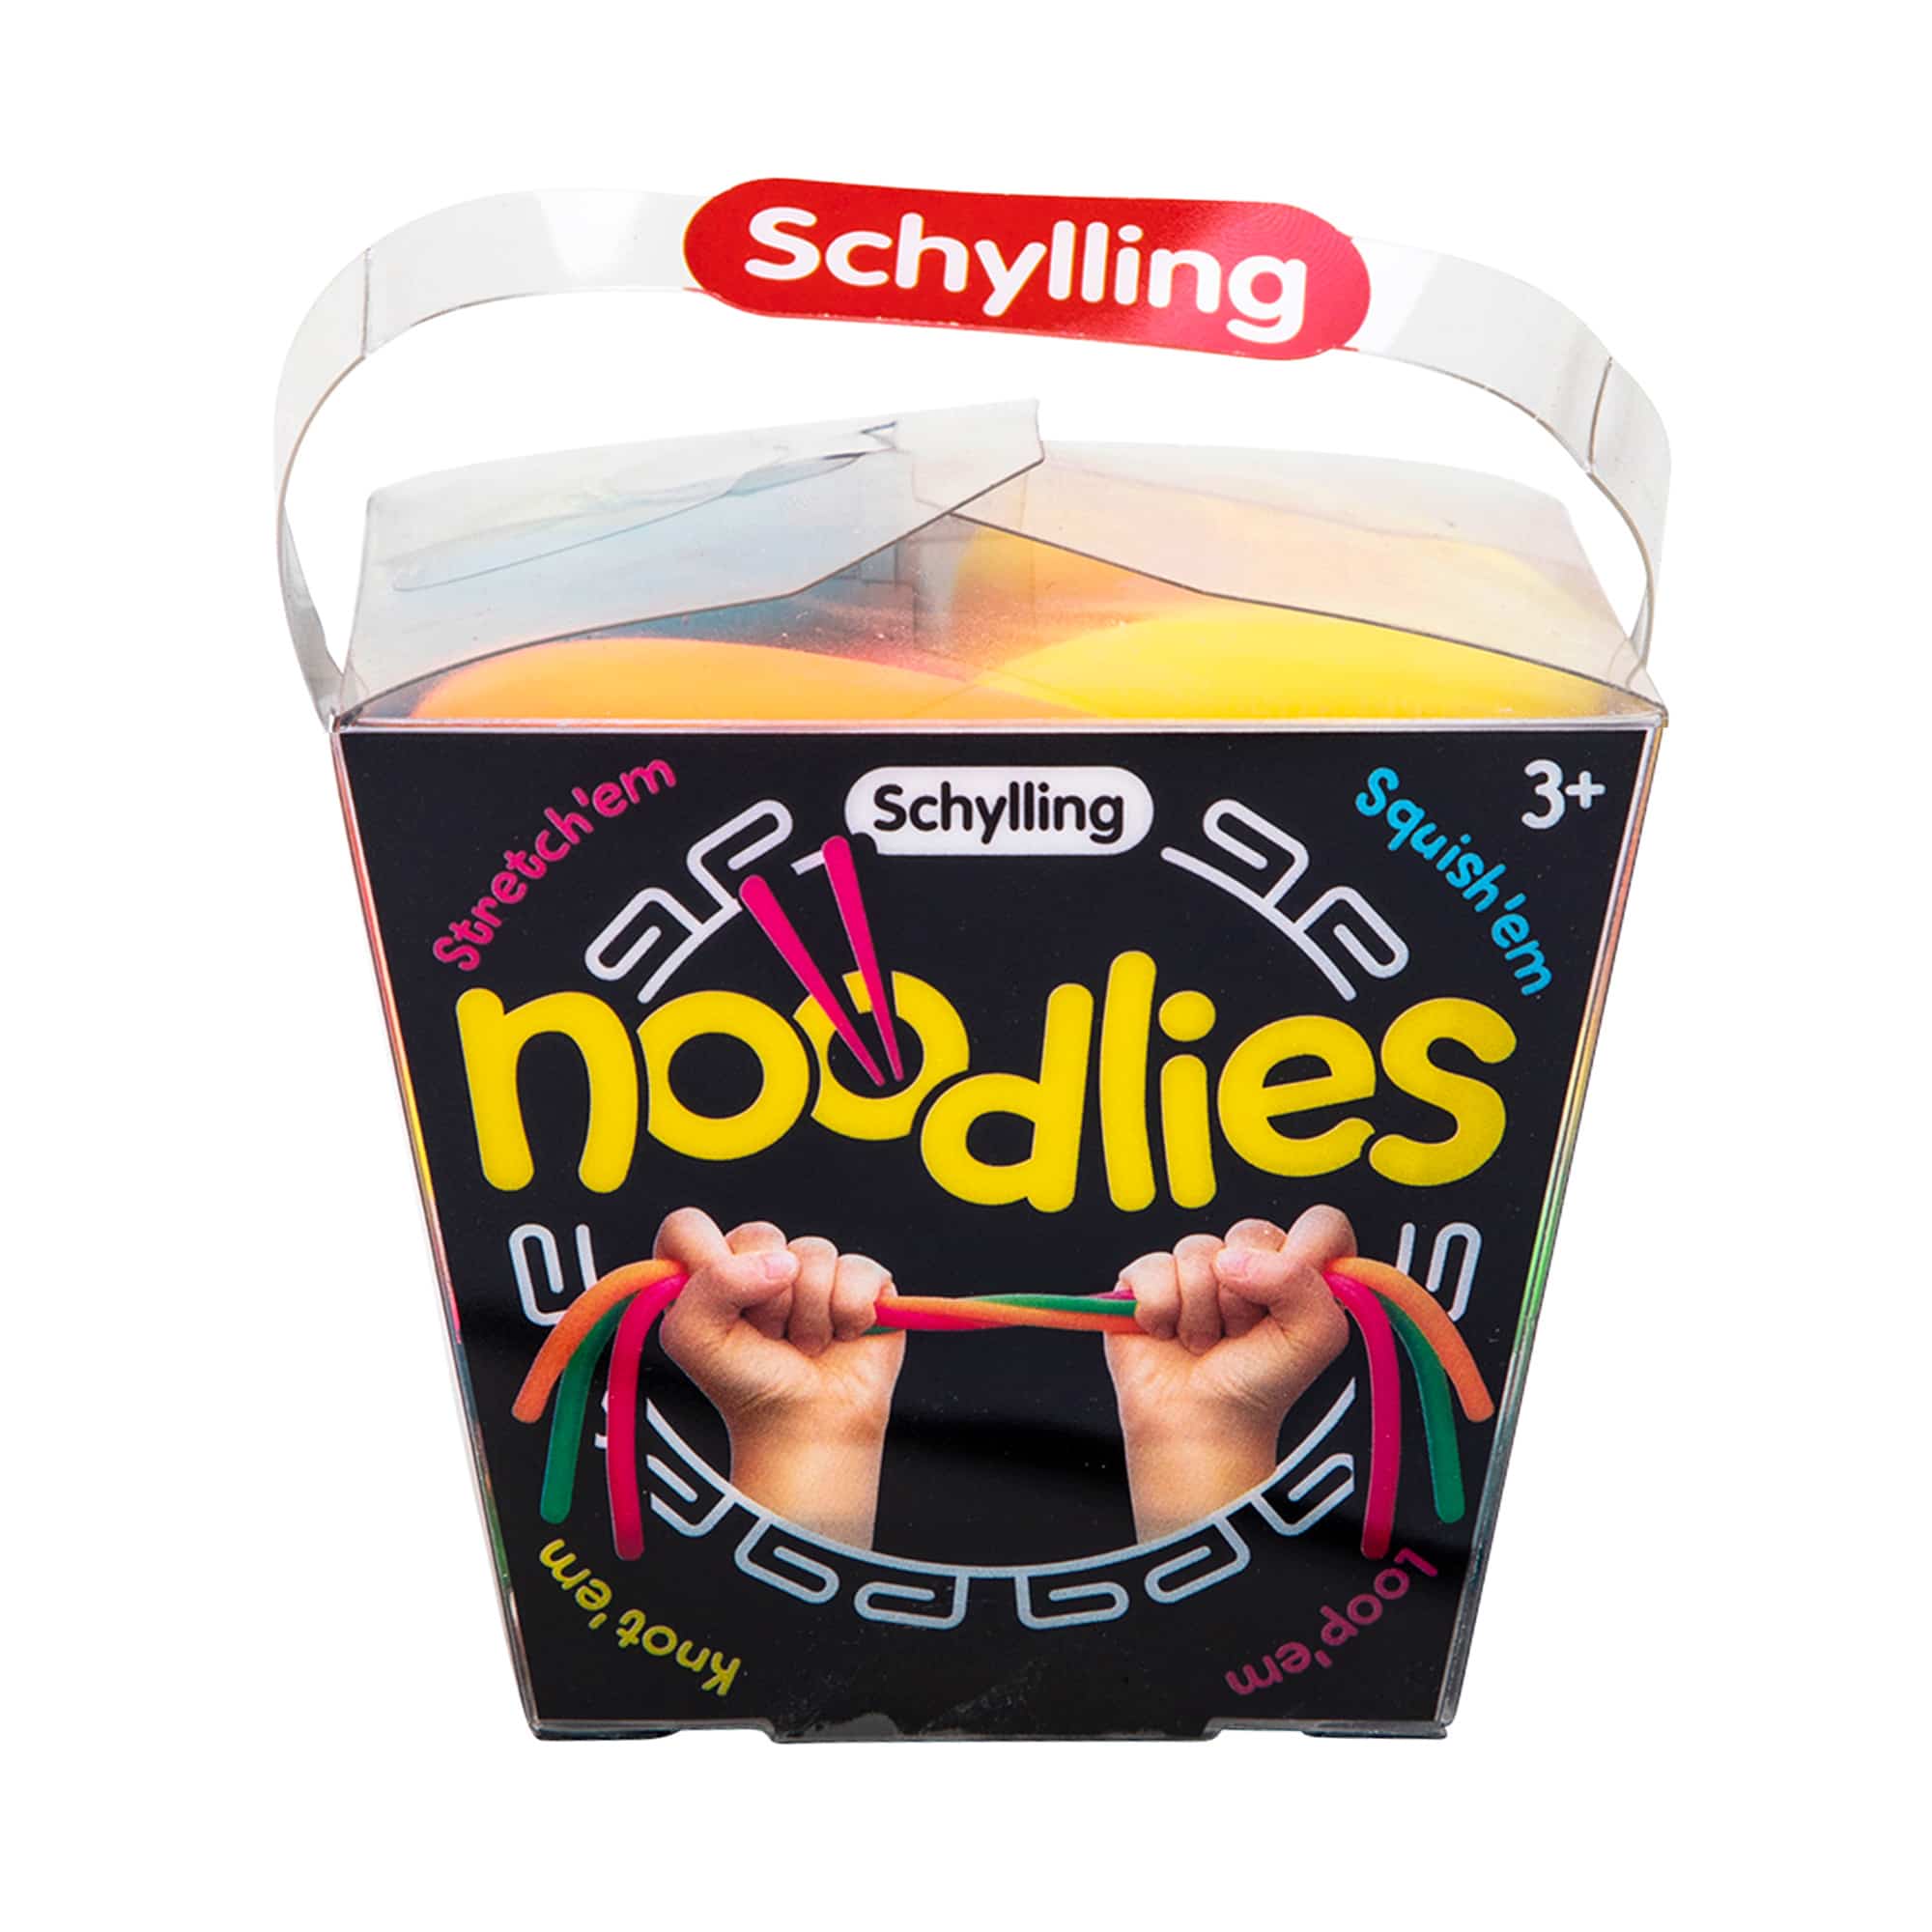 Schylling-Noodlies-NL-Legacy Toys